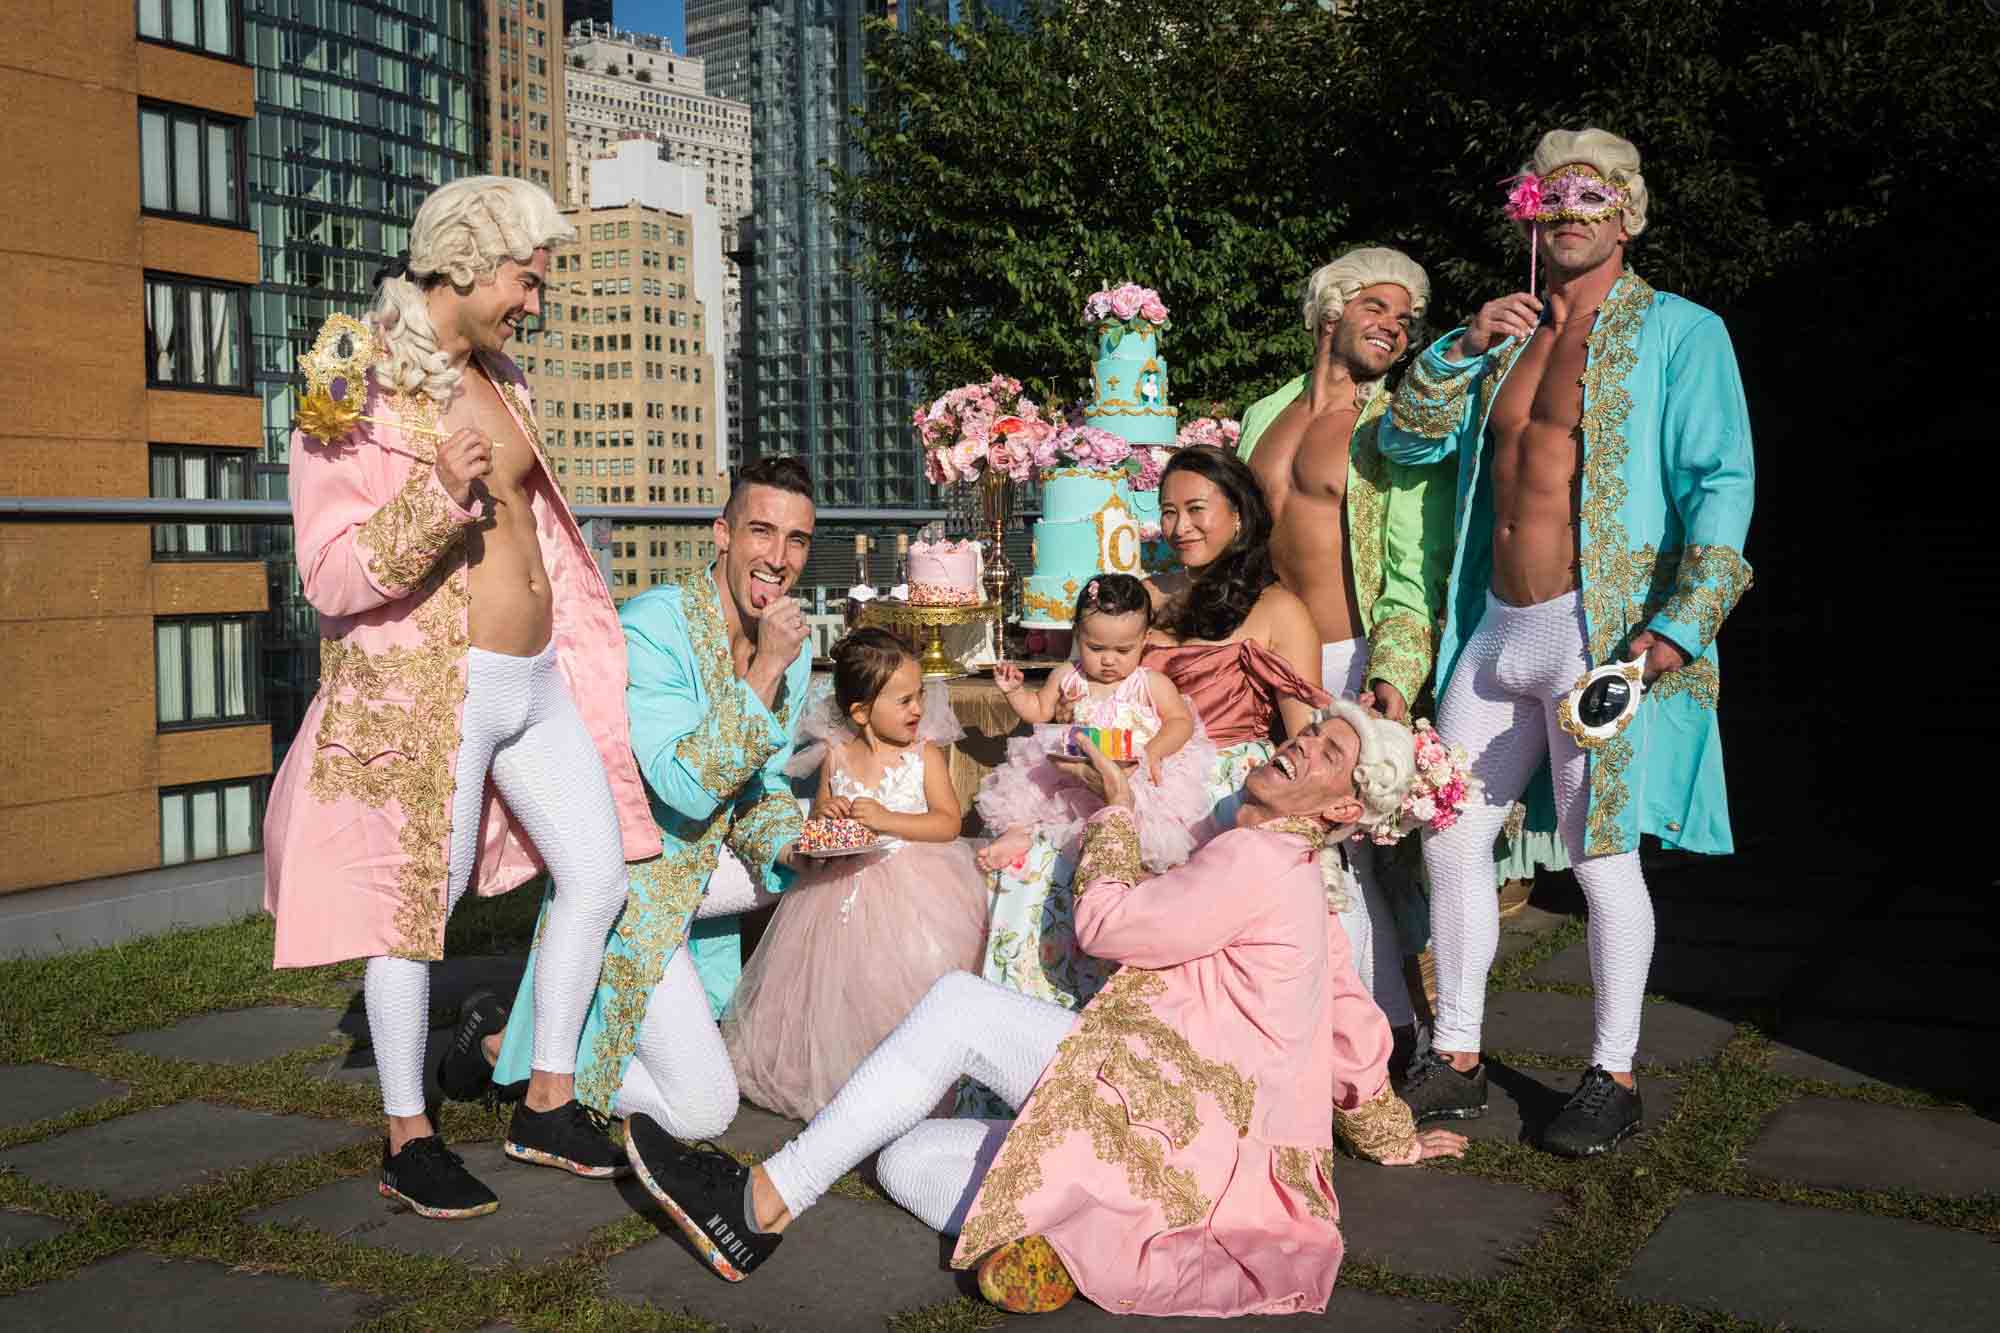 Guests dressed as Marie Antoinette and French courtiers for an article on event planning photography tips